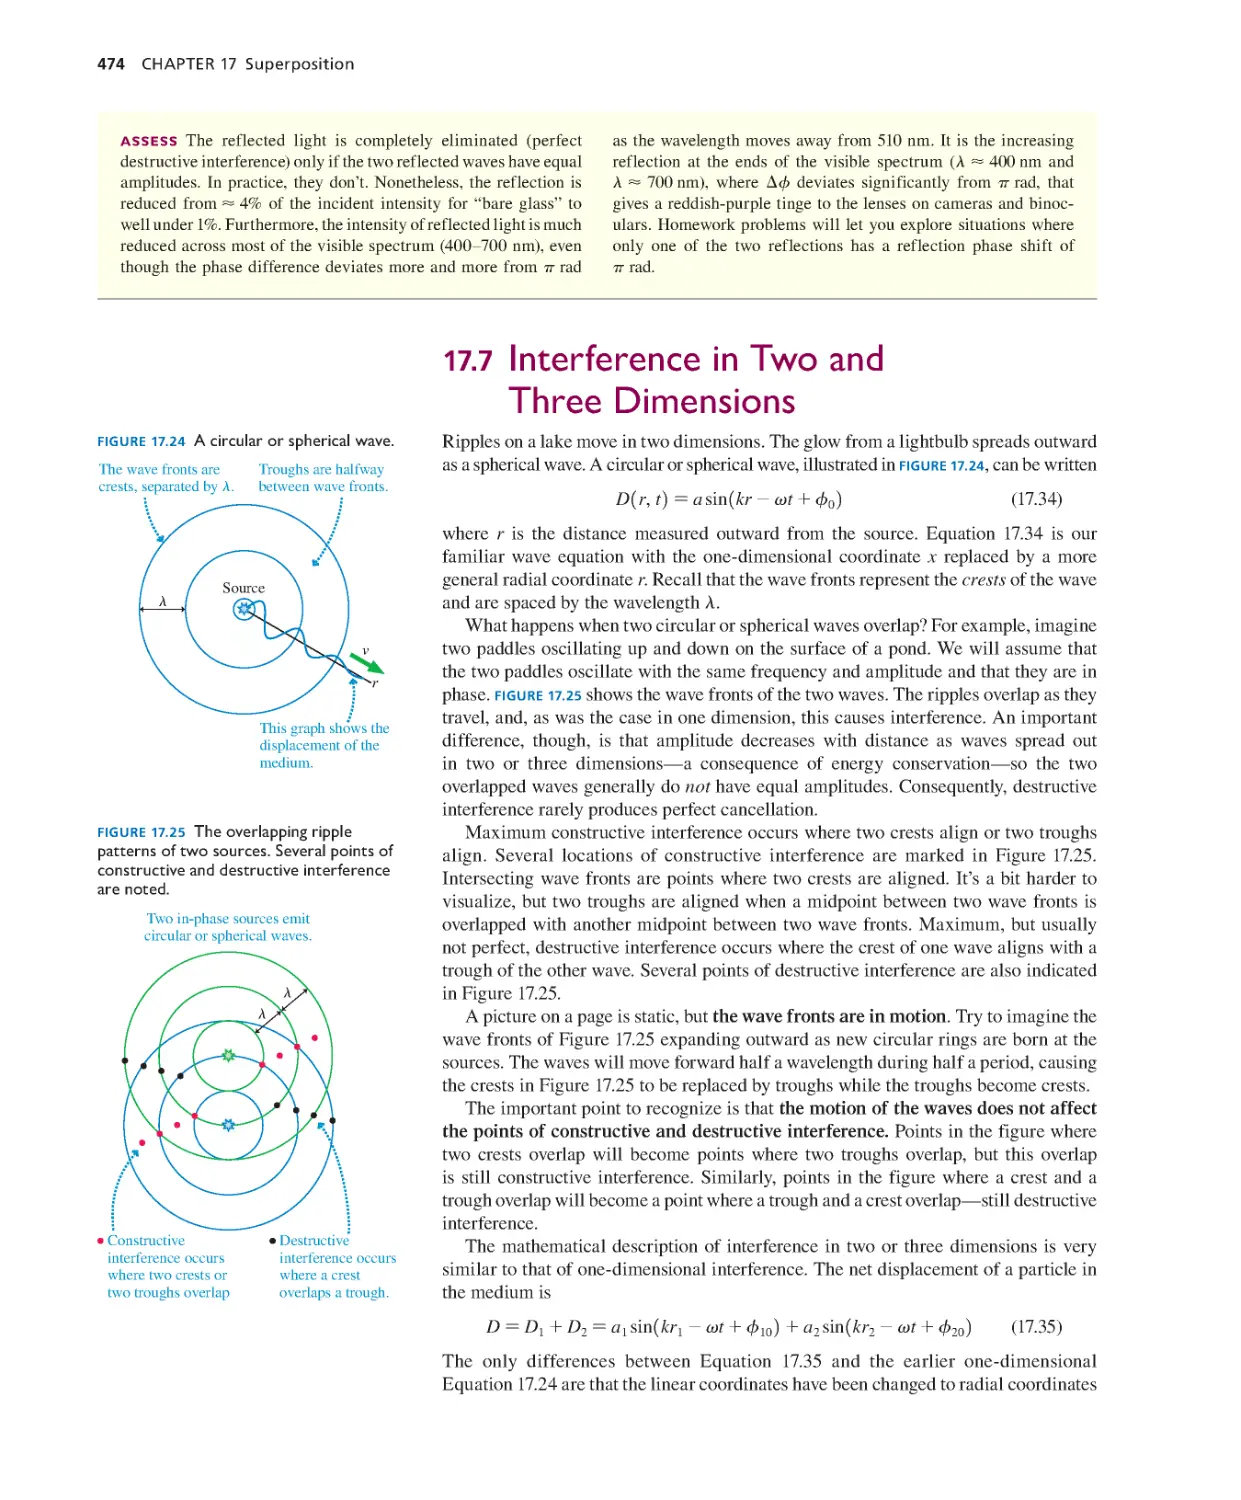 17.7. Interference in Two and Three Dimensions